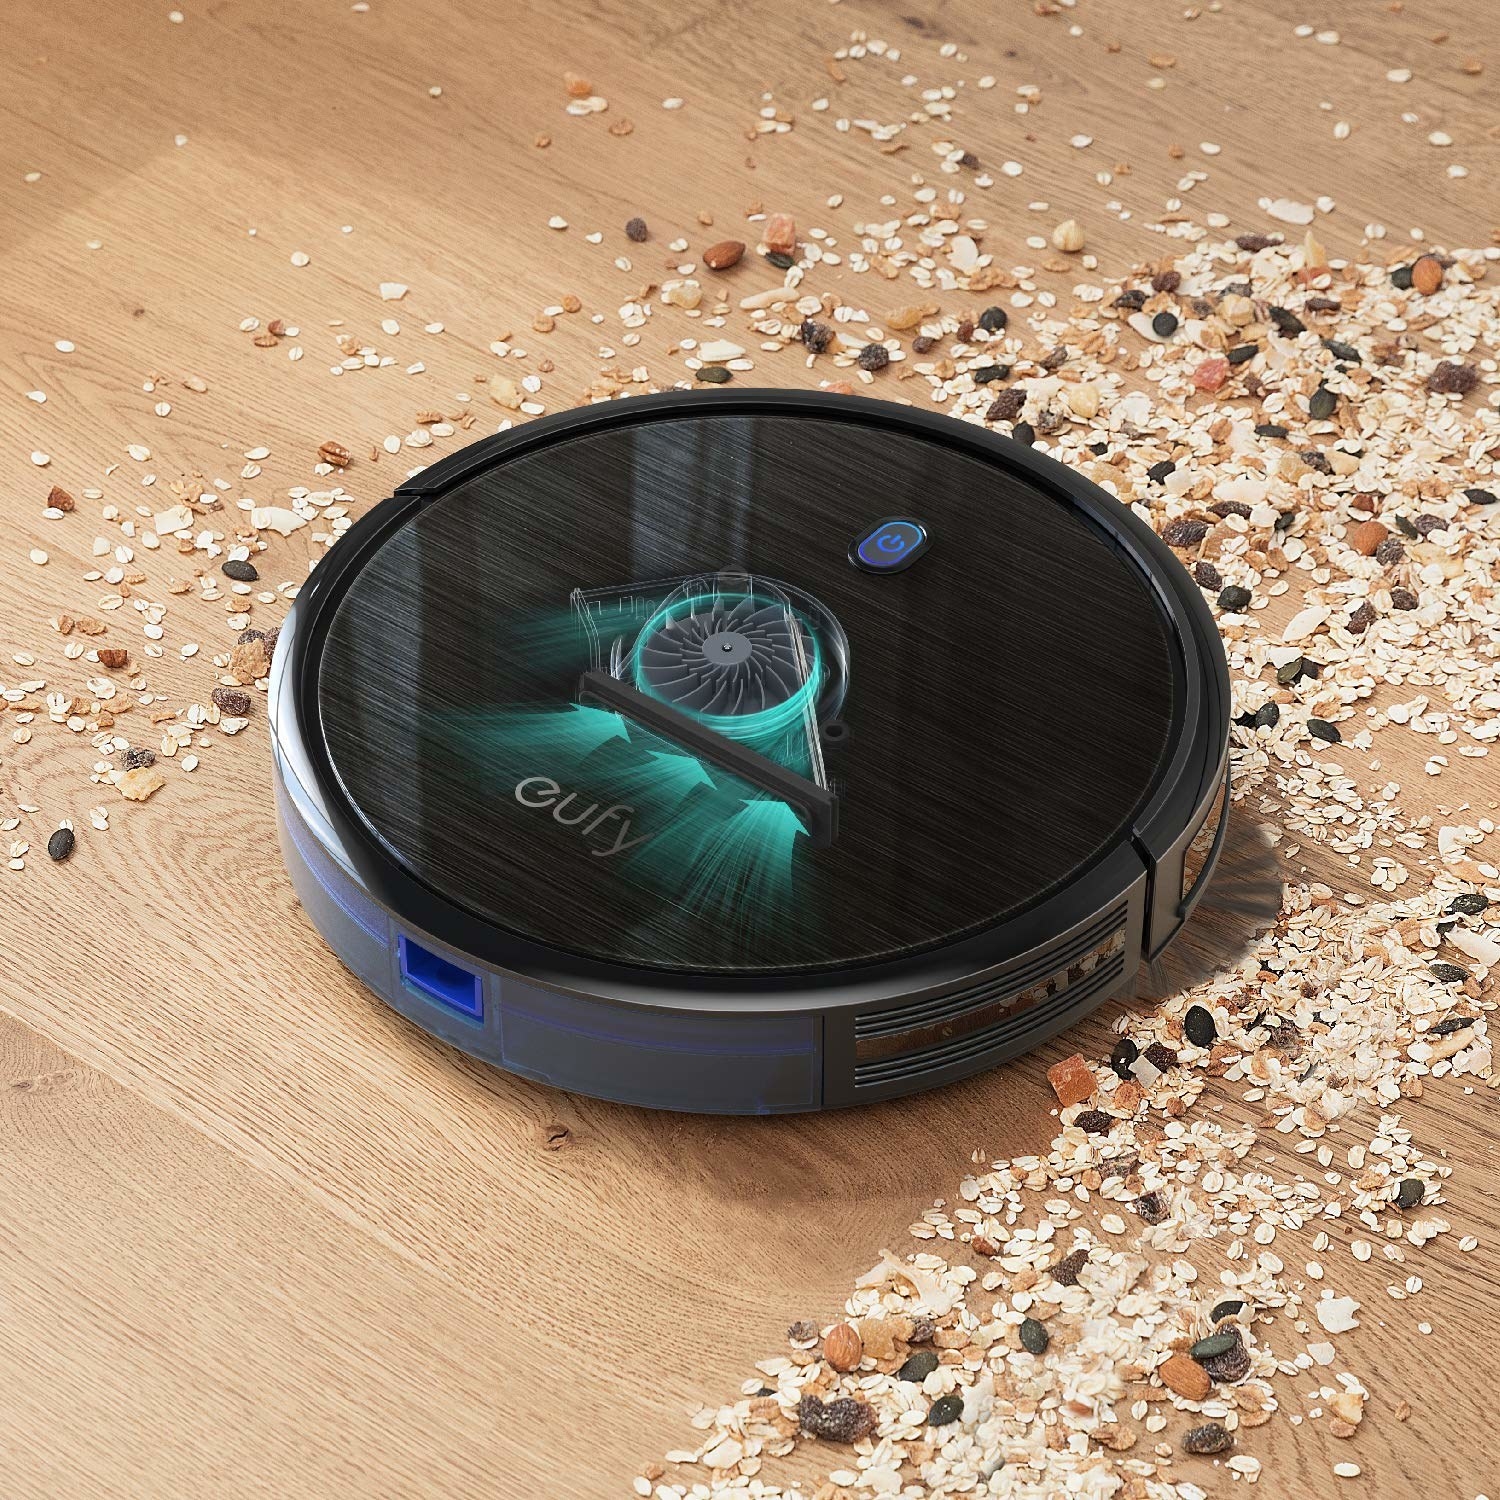 The vacuum picking up oats and raisins off a hardwood floor